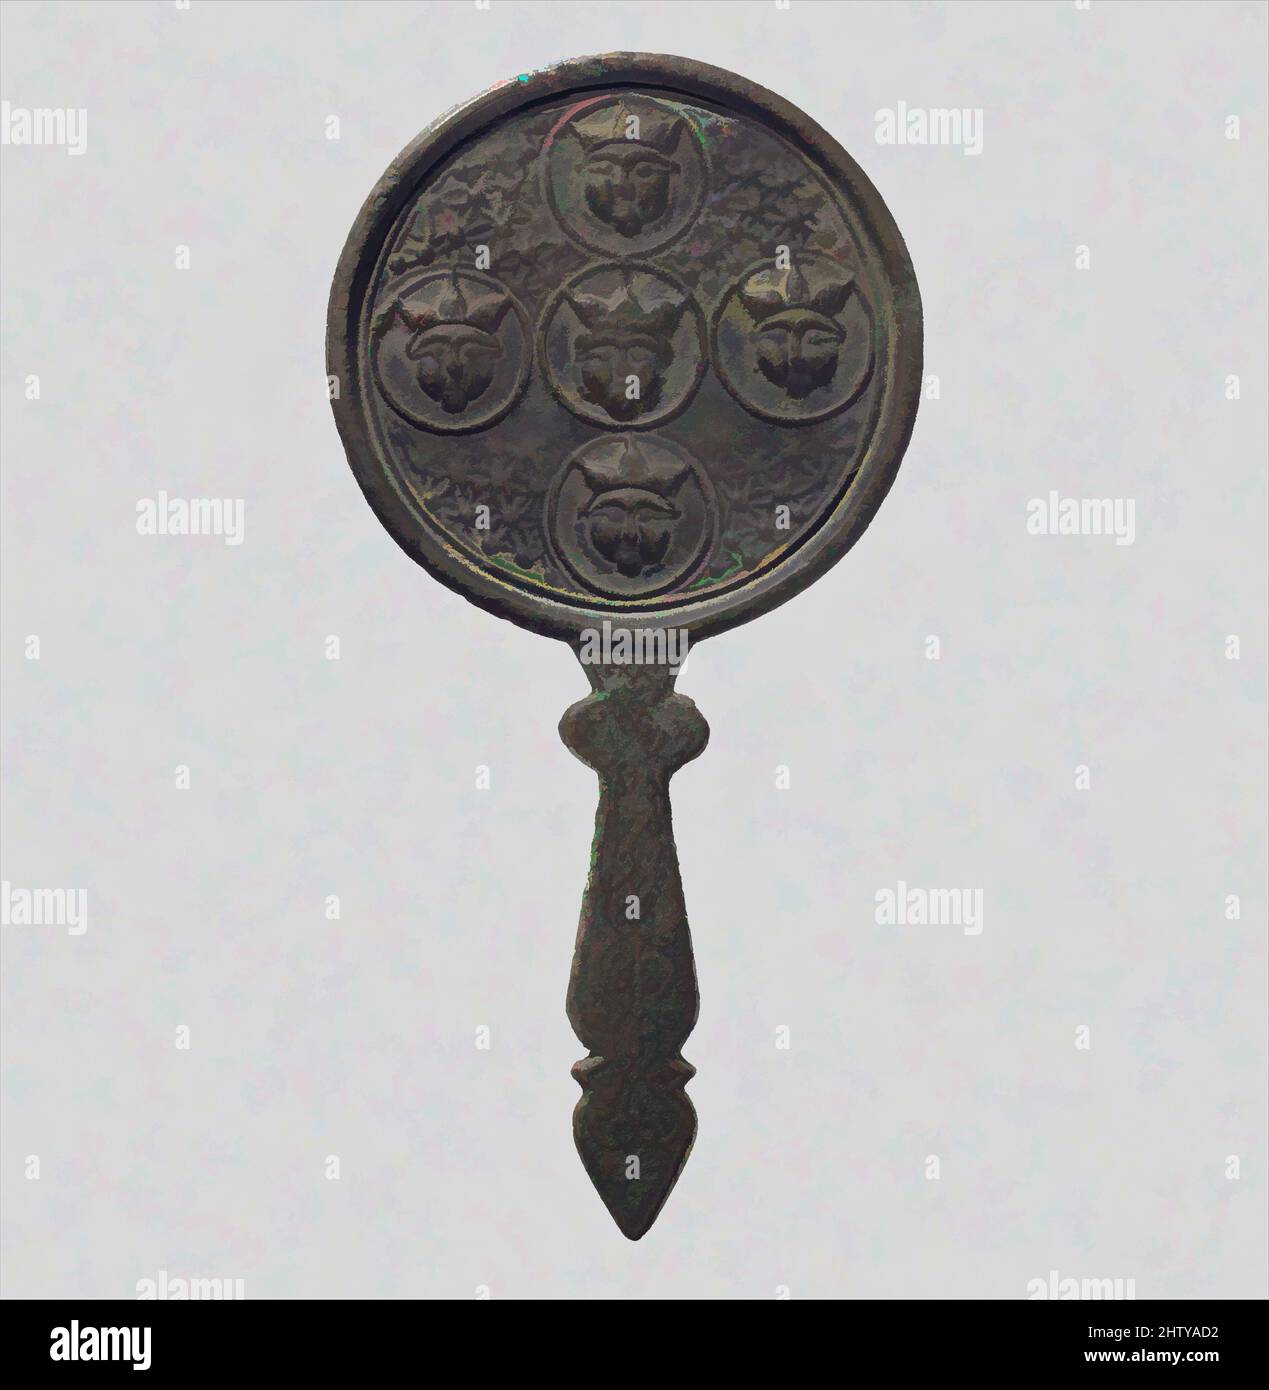 Art inspired by Three Mirrors, 13th century, Attributed to Iran or Central Asia, Bronze; cast, H. 5 15/16 in. (15.08 cm), Metal, Cast bronze mirrors were often used for divination or magical medicine. The polished metallic front provided a reflective surface. Often, the decoration on, Classic works modernized by Artotop with a splash of modernity. Shapes, color and value, eye-catching visual impact on art. Emotions through freedom of artworks in a contemporary way. A timeless message pursuing a wildly creative new direction. Artists turning to the digital medium and creating the Artotop NFT Stock Photo